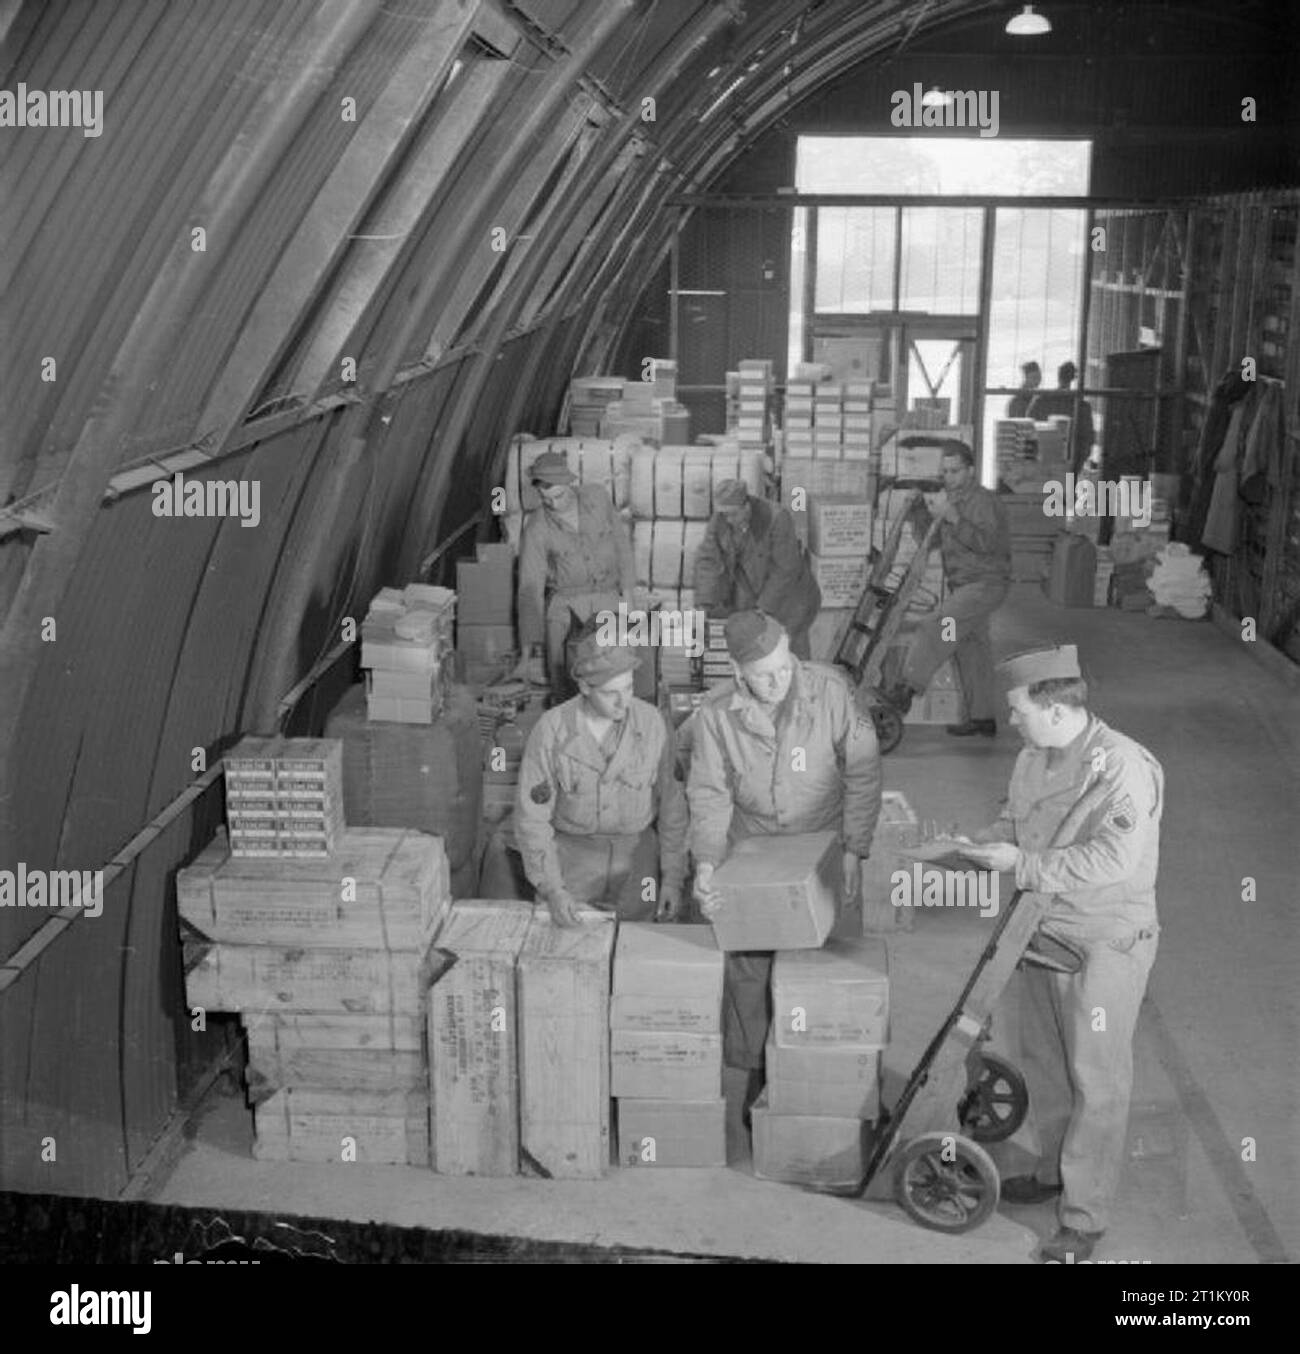 Britain Supplies US Army Store- Americans in Britain, 1943 GIs at work at an American Army store, somewhere in Britain. This particular area of the store supplies goods for Post Exchanges (also known as PXs), including candles, chocolate, shaving cream, toothpaste, batteries, ink, writing paper, shoe polish and playing cards. Making up a load for dispatch in the foreground are (left to right): T/5 Joe Brethauer (of Rote 2, Box 245, Fort Lupton, Colorado), Pfc Bernard Hanson (of 148 Magnolia Avenue, Kearny, New Jersey) and Staff Sergeant Robert McKenna of Big Bend, Wisconsin. Stock Photo